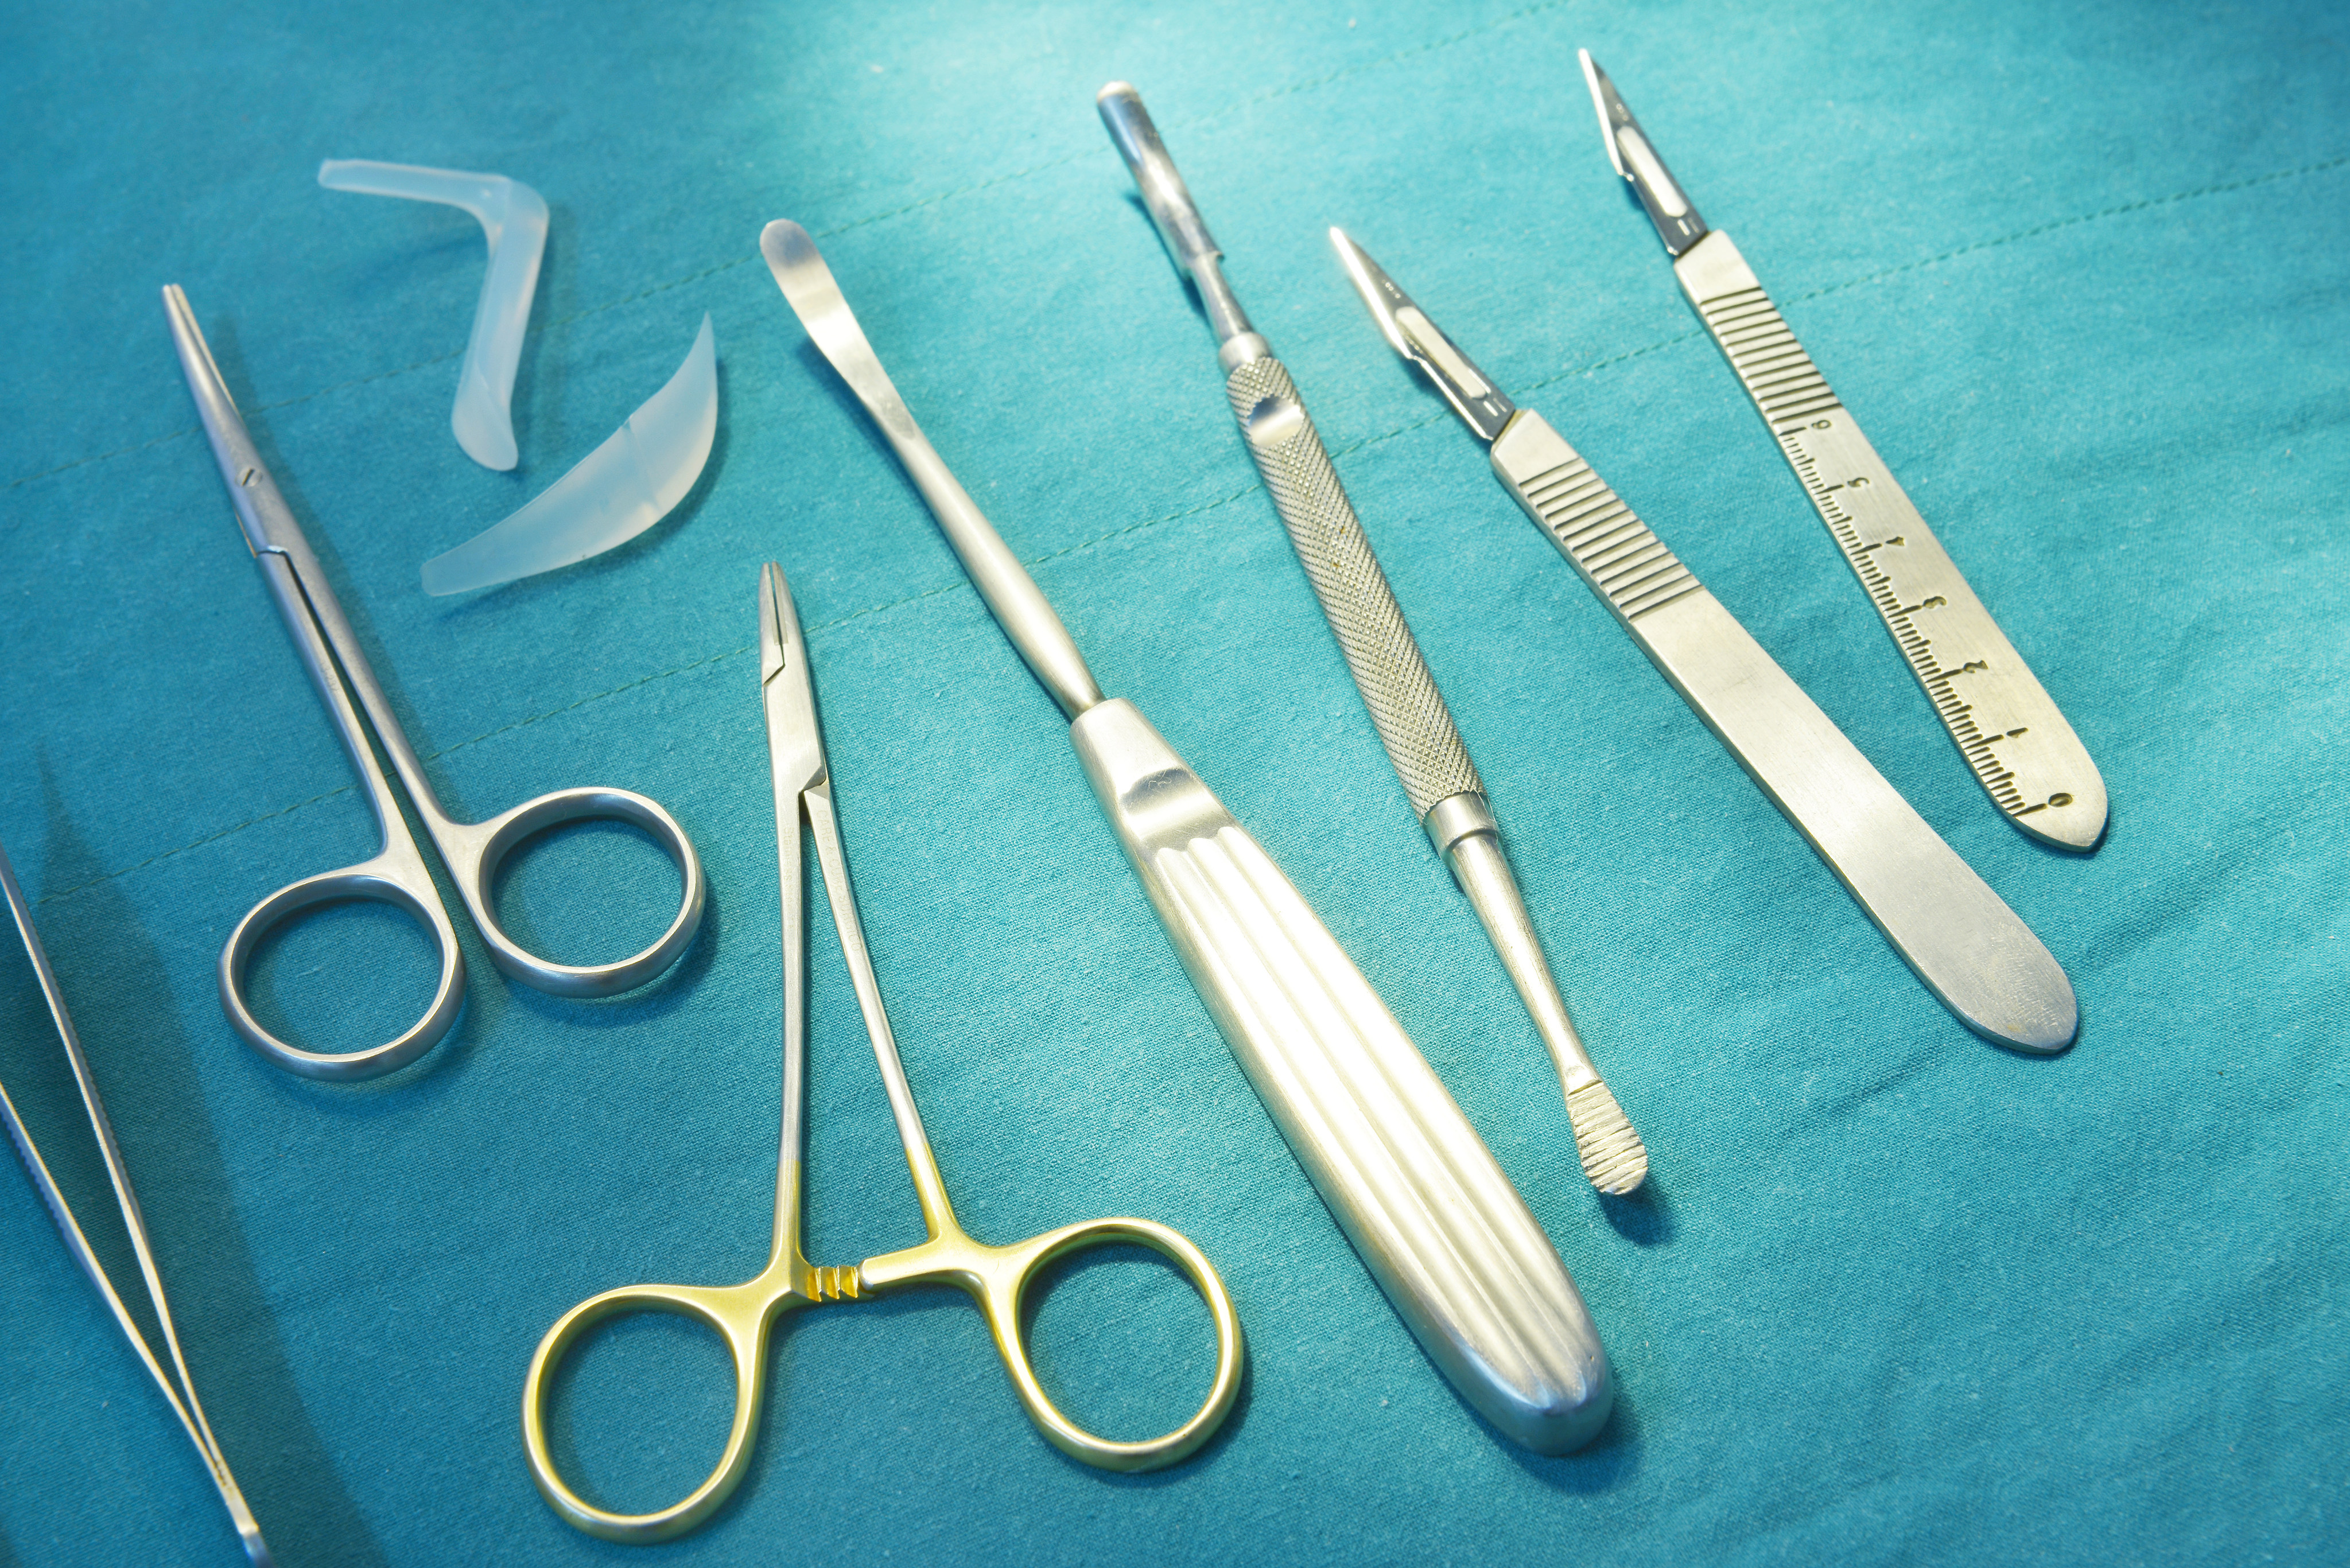 Surgical instruments. Officials said the beautician in the case was unlicensed and performed her services out of a rented house. Photo: Shutterstock
